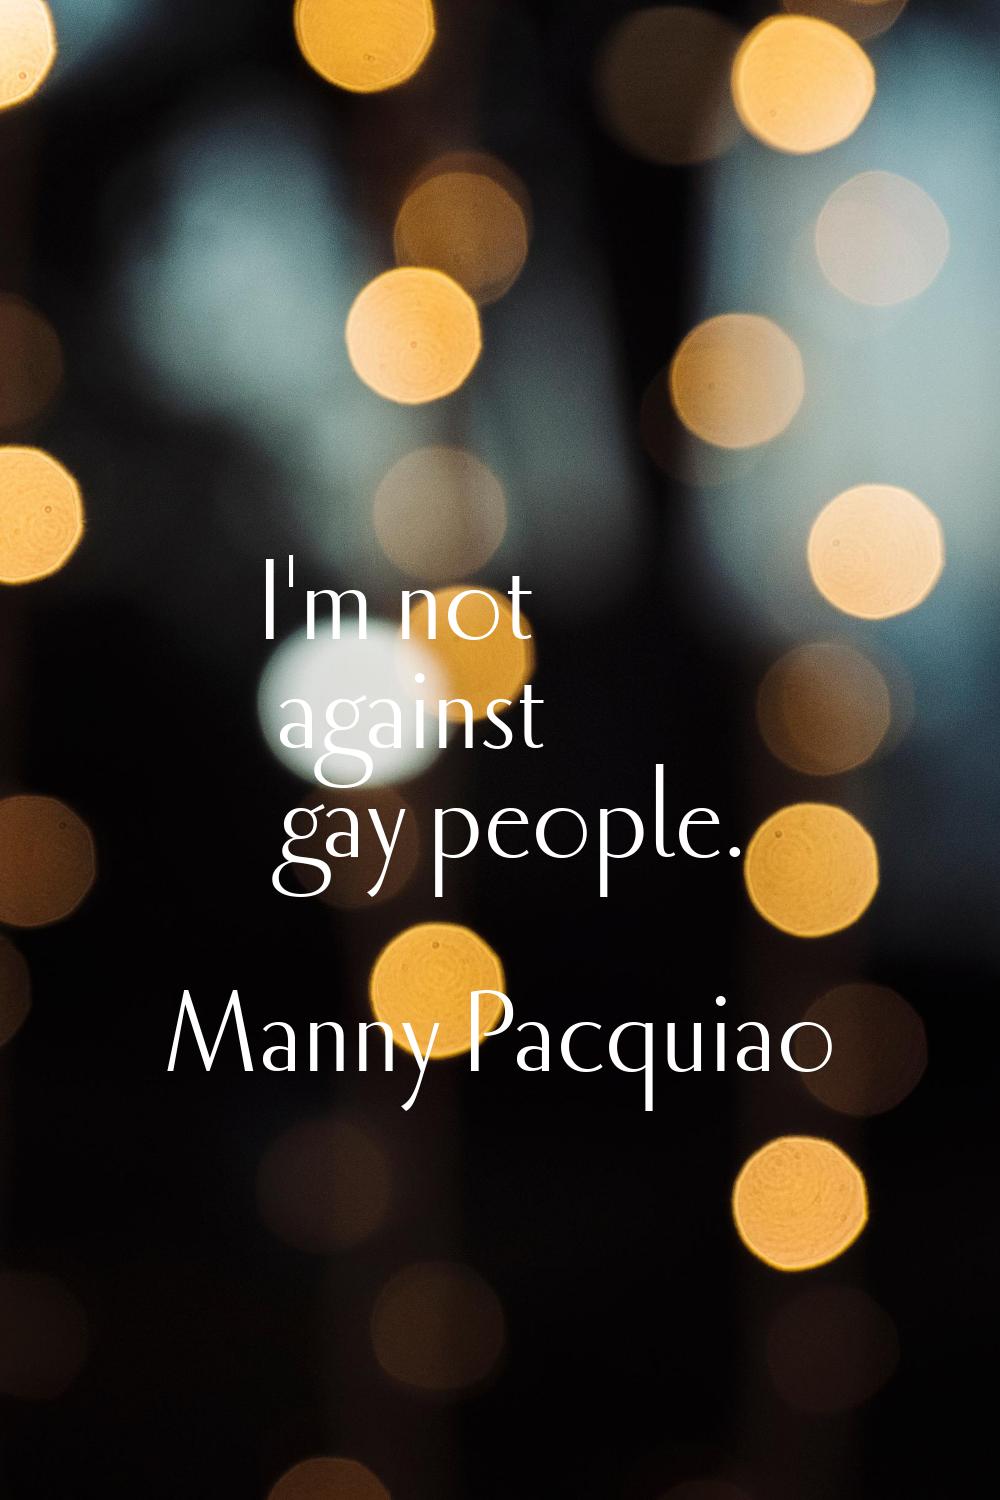 I'm not against gay people.